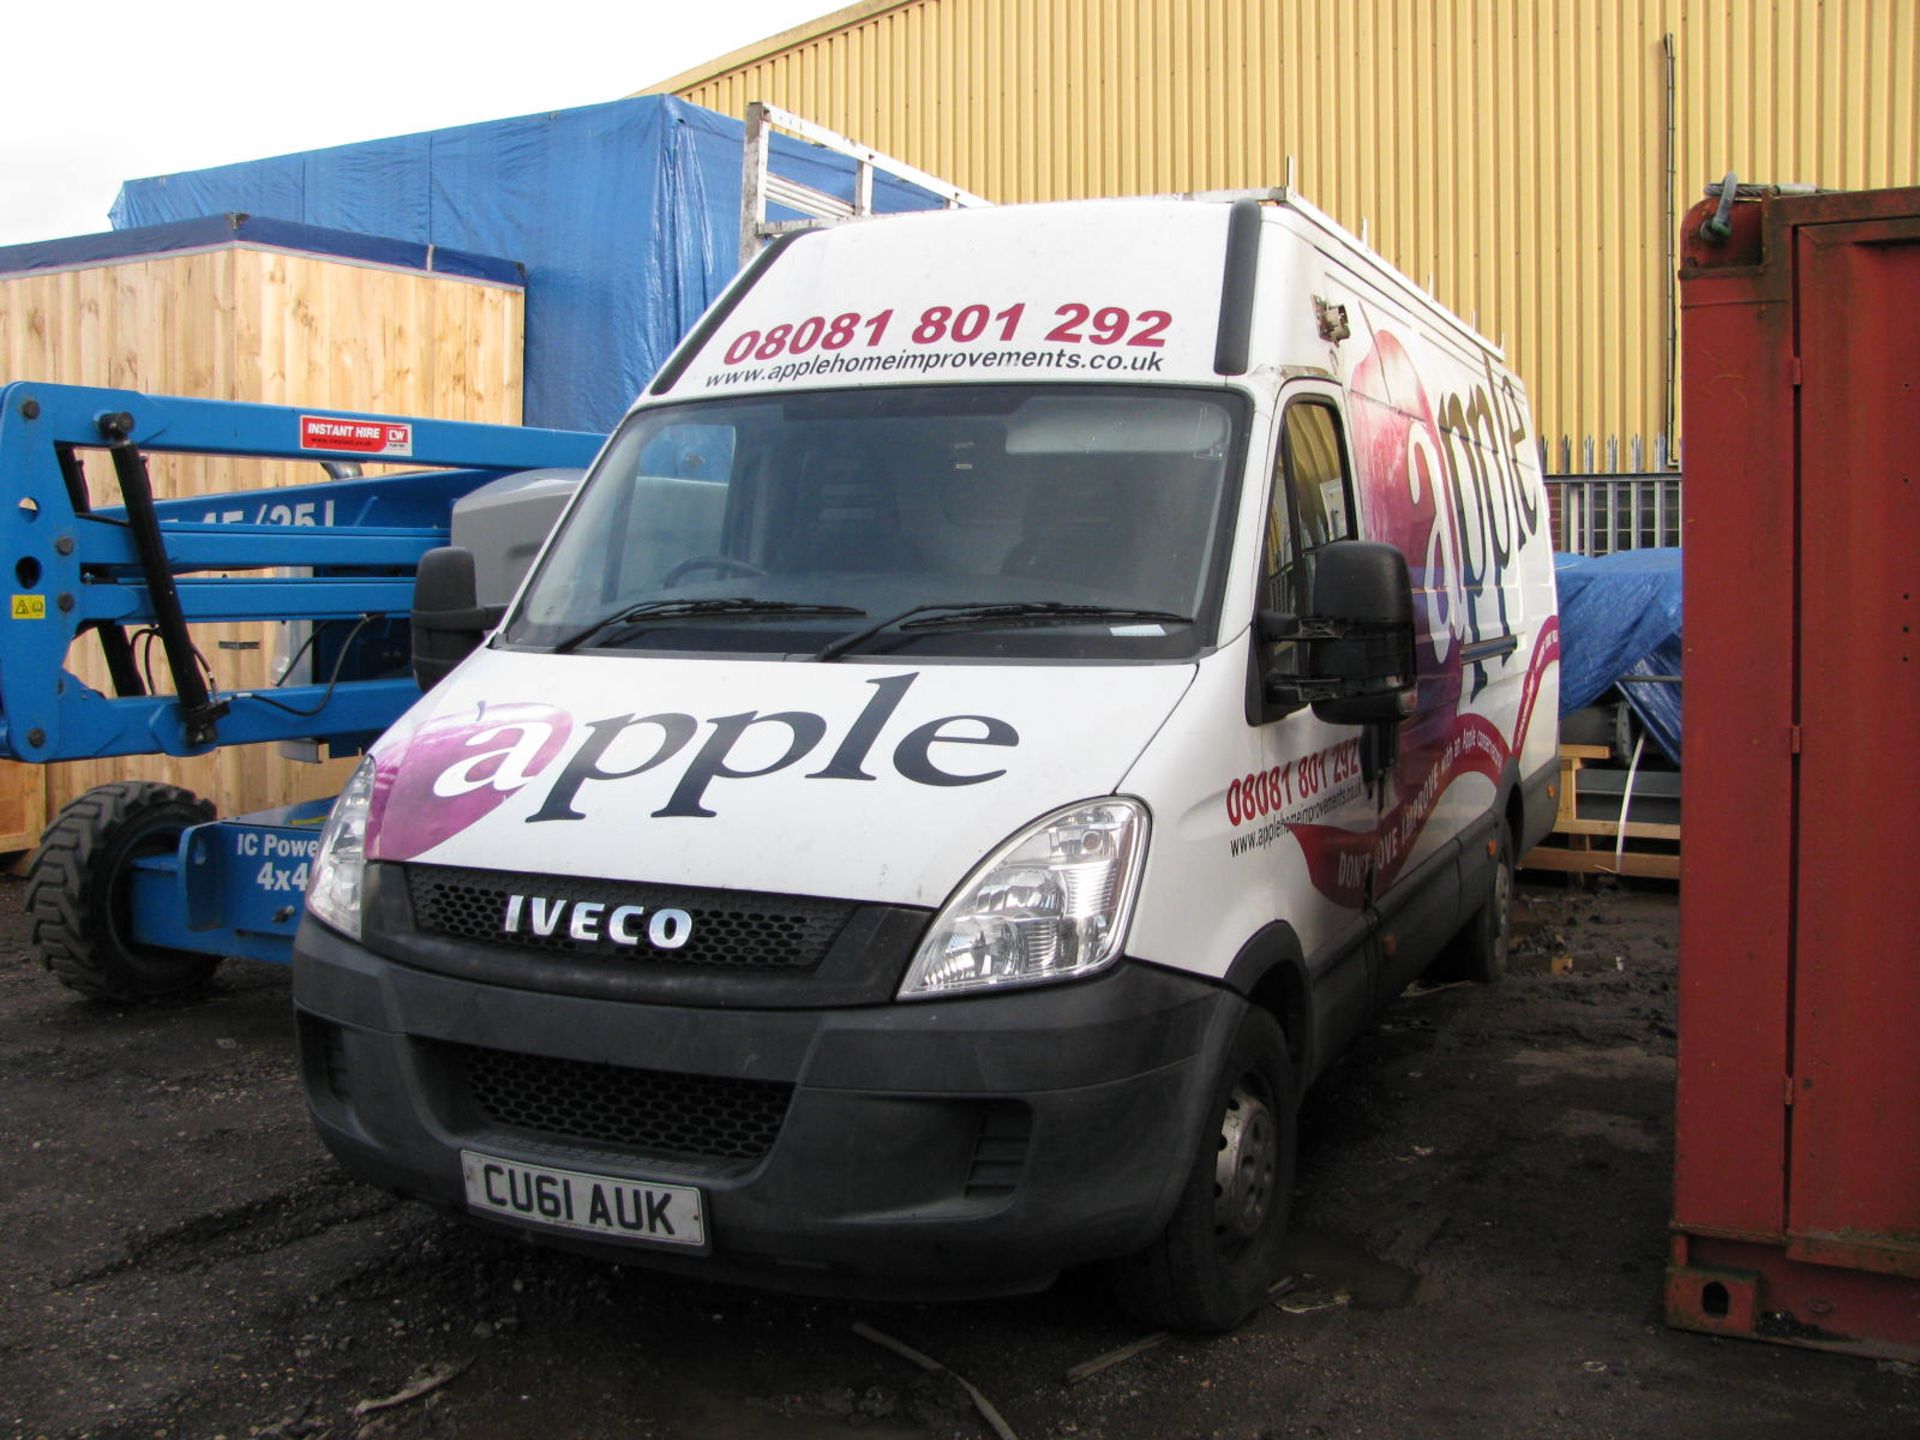 Iveco Daily 2.3 Hdi 35 S13 LWB Panel van, Registration No. CU61 AUK - Image 3 of 3